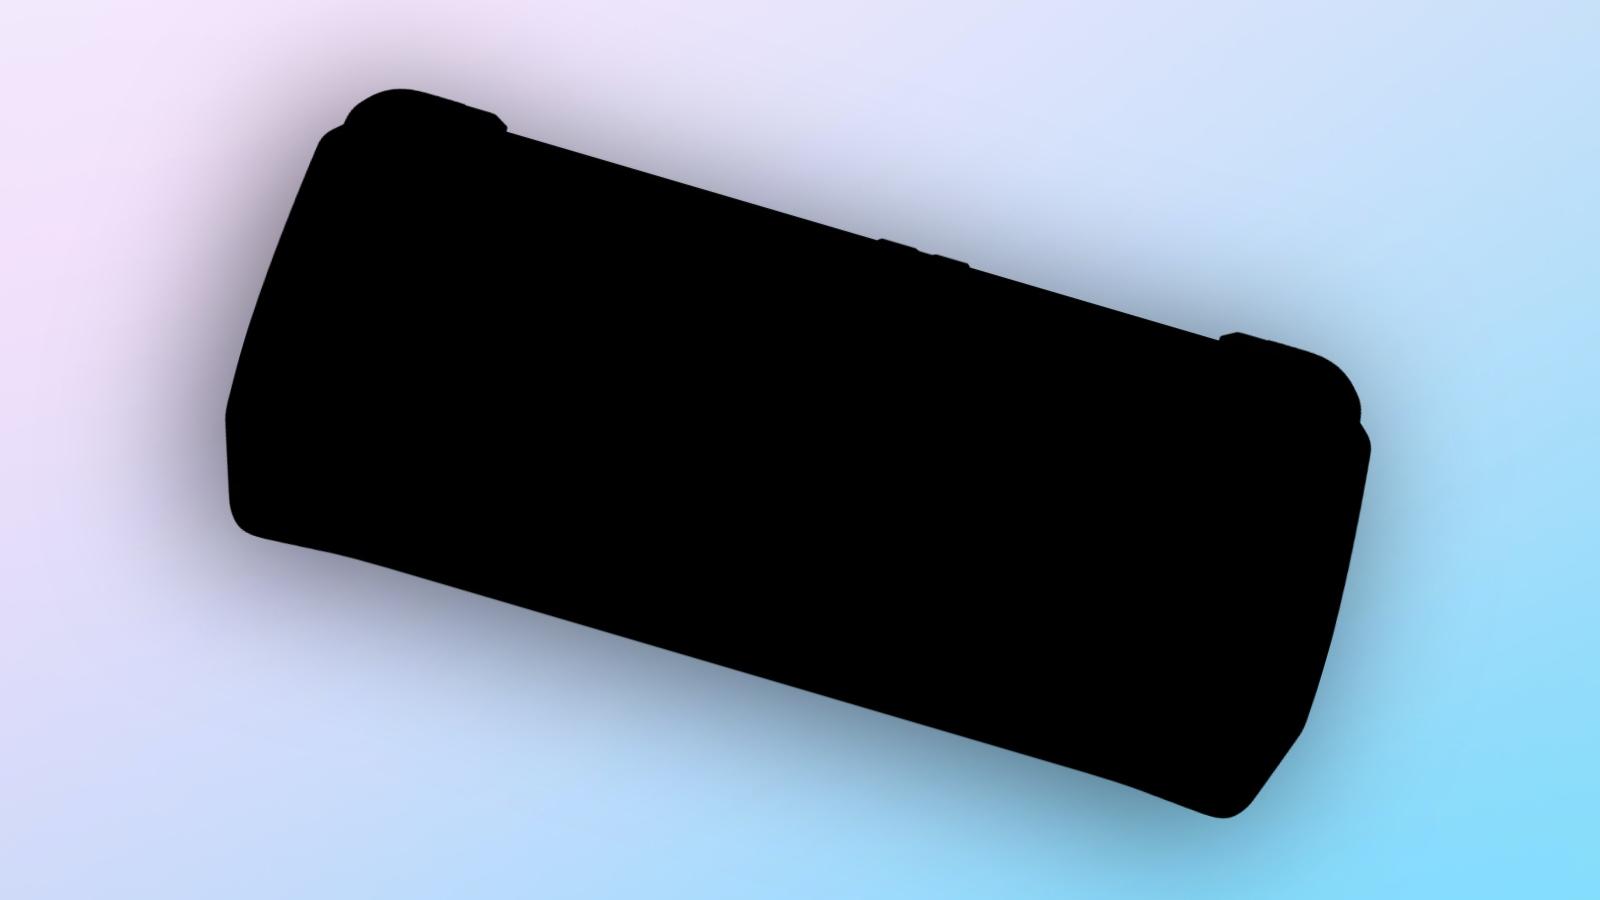 Silhouette of a gaming handheld on a gradient background